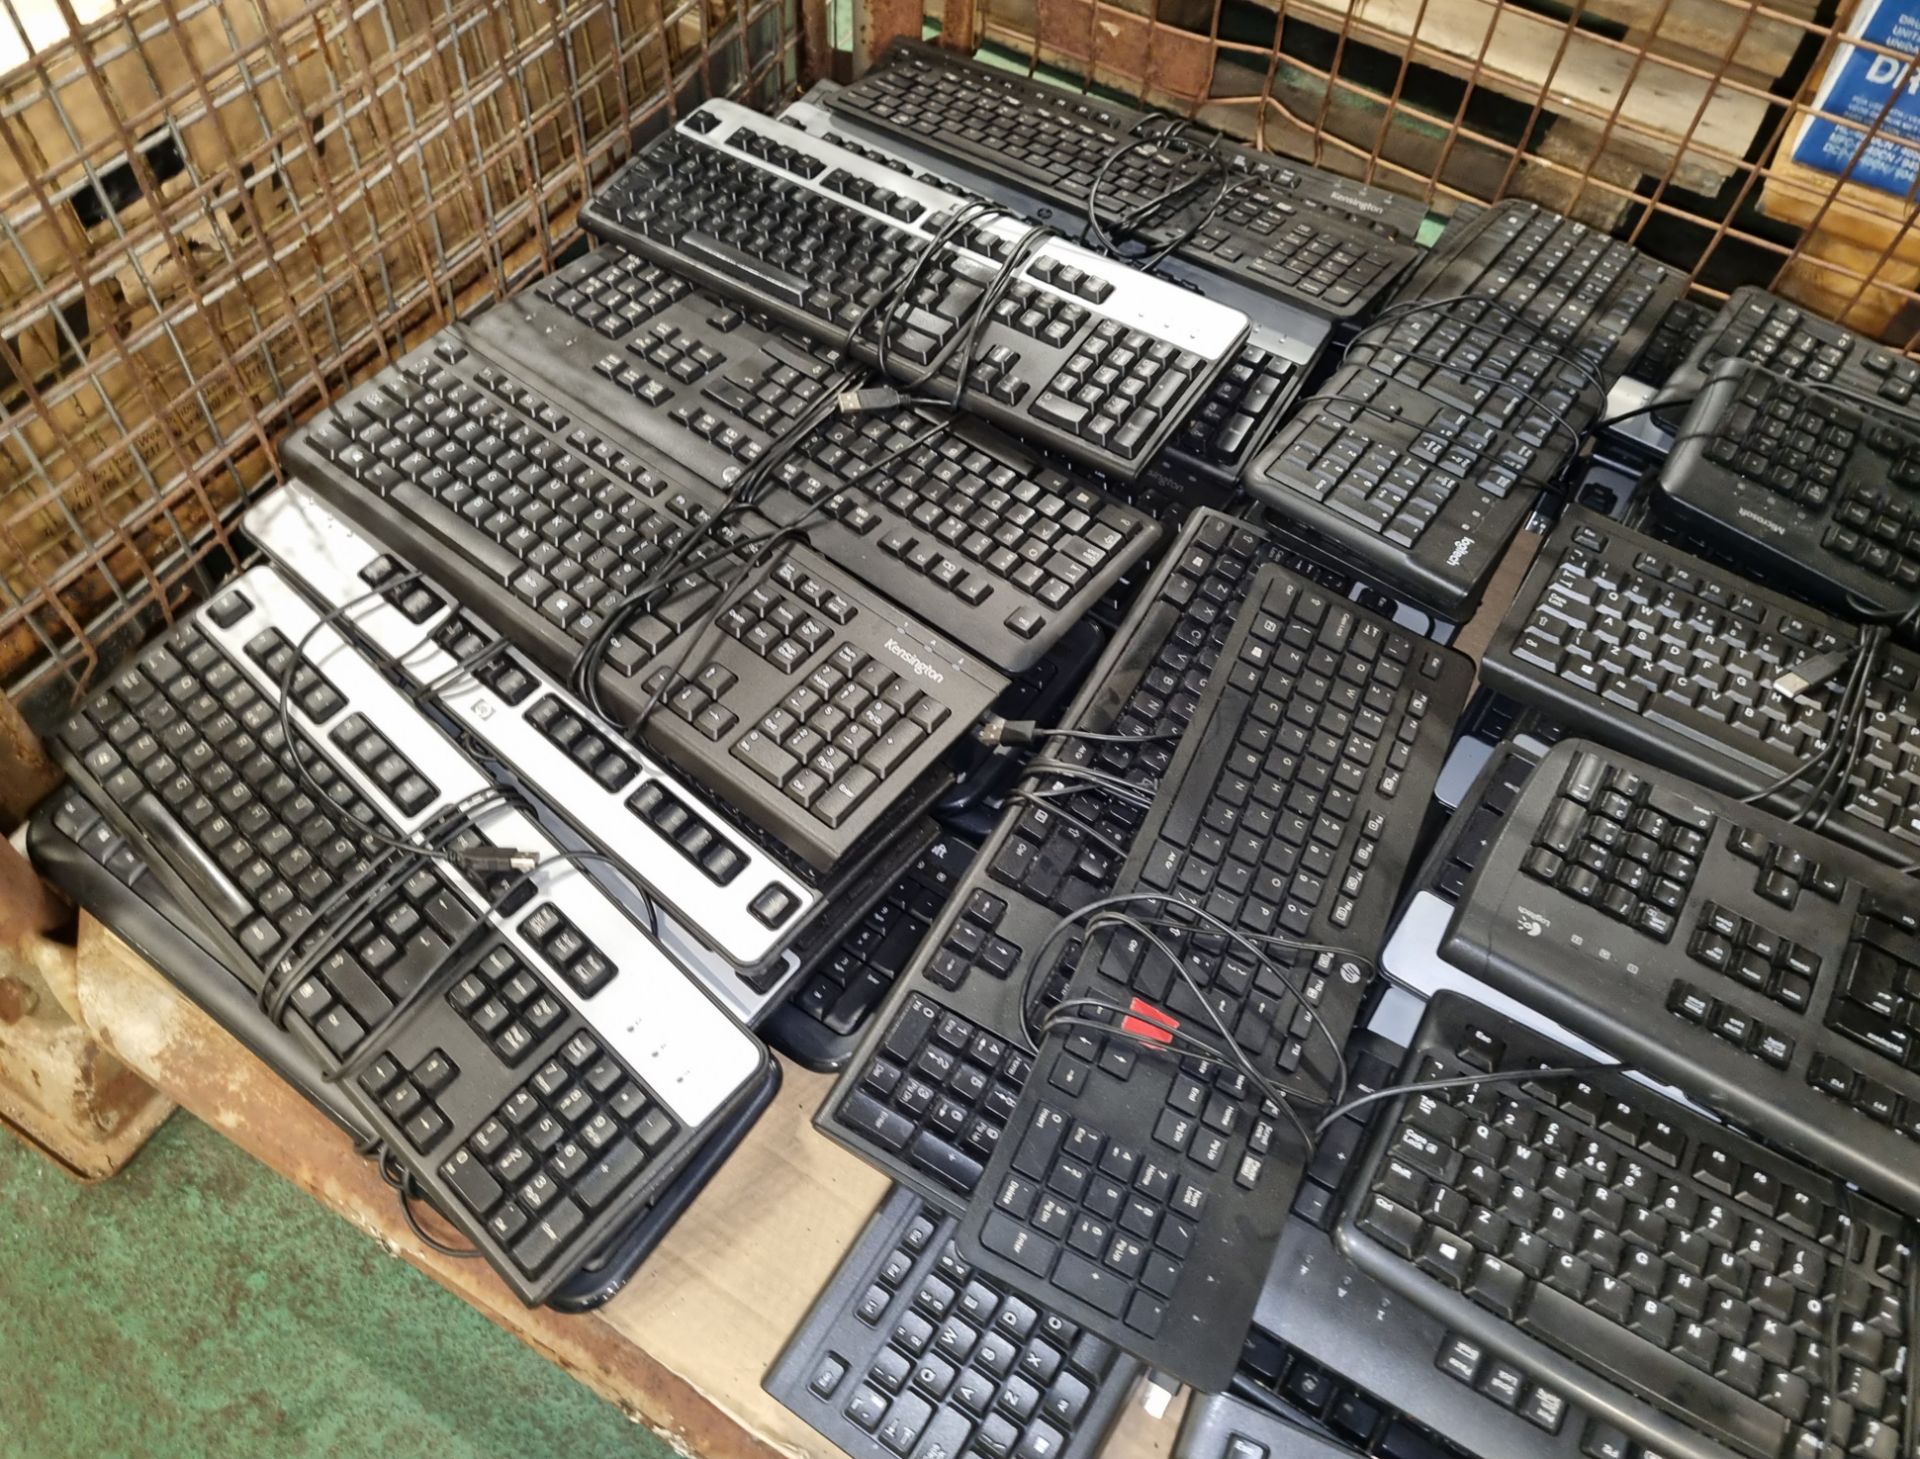 90x computer keyboards of multiple makes - HP, Logitech and Kensington - Image 4 of 5